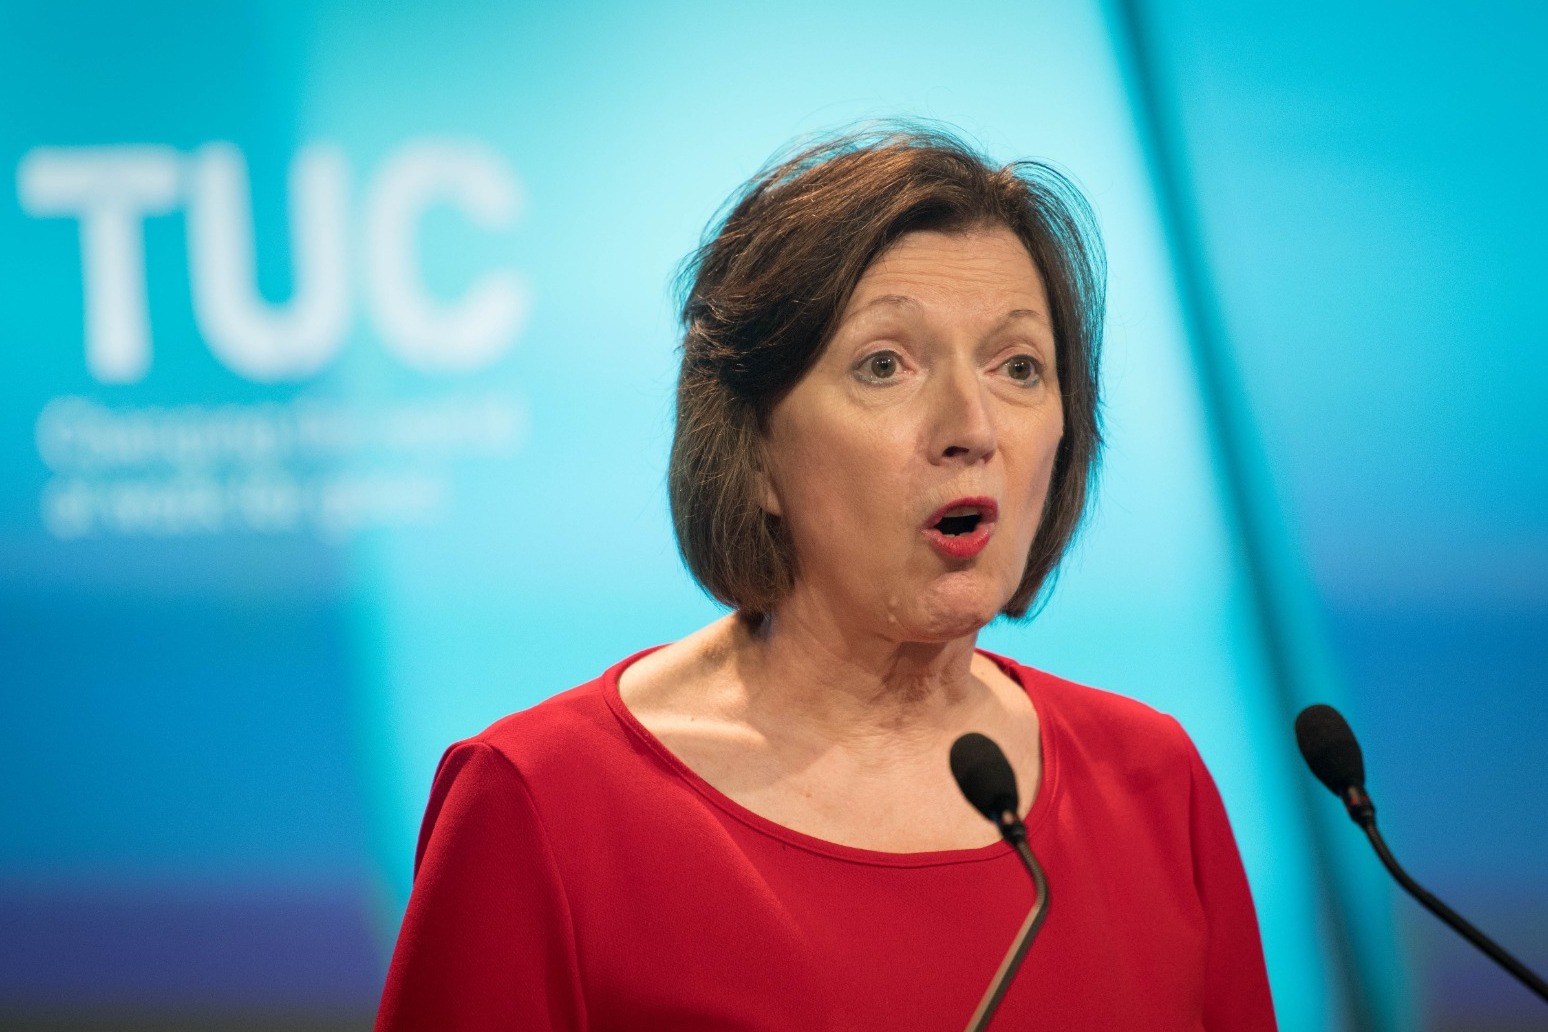 Huge increase in cost of childcare over past decade – TUC 